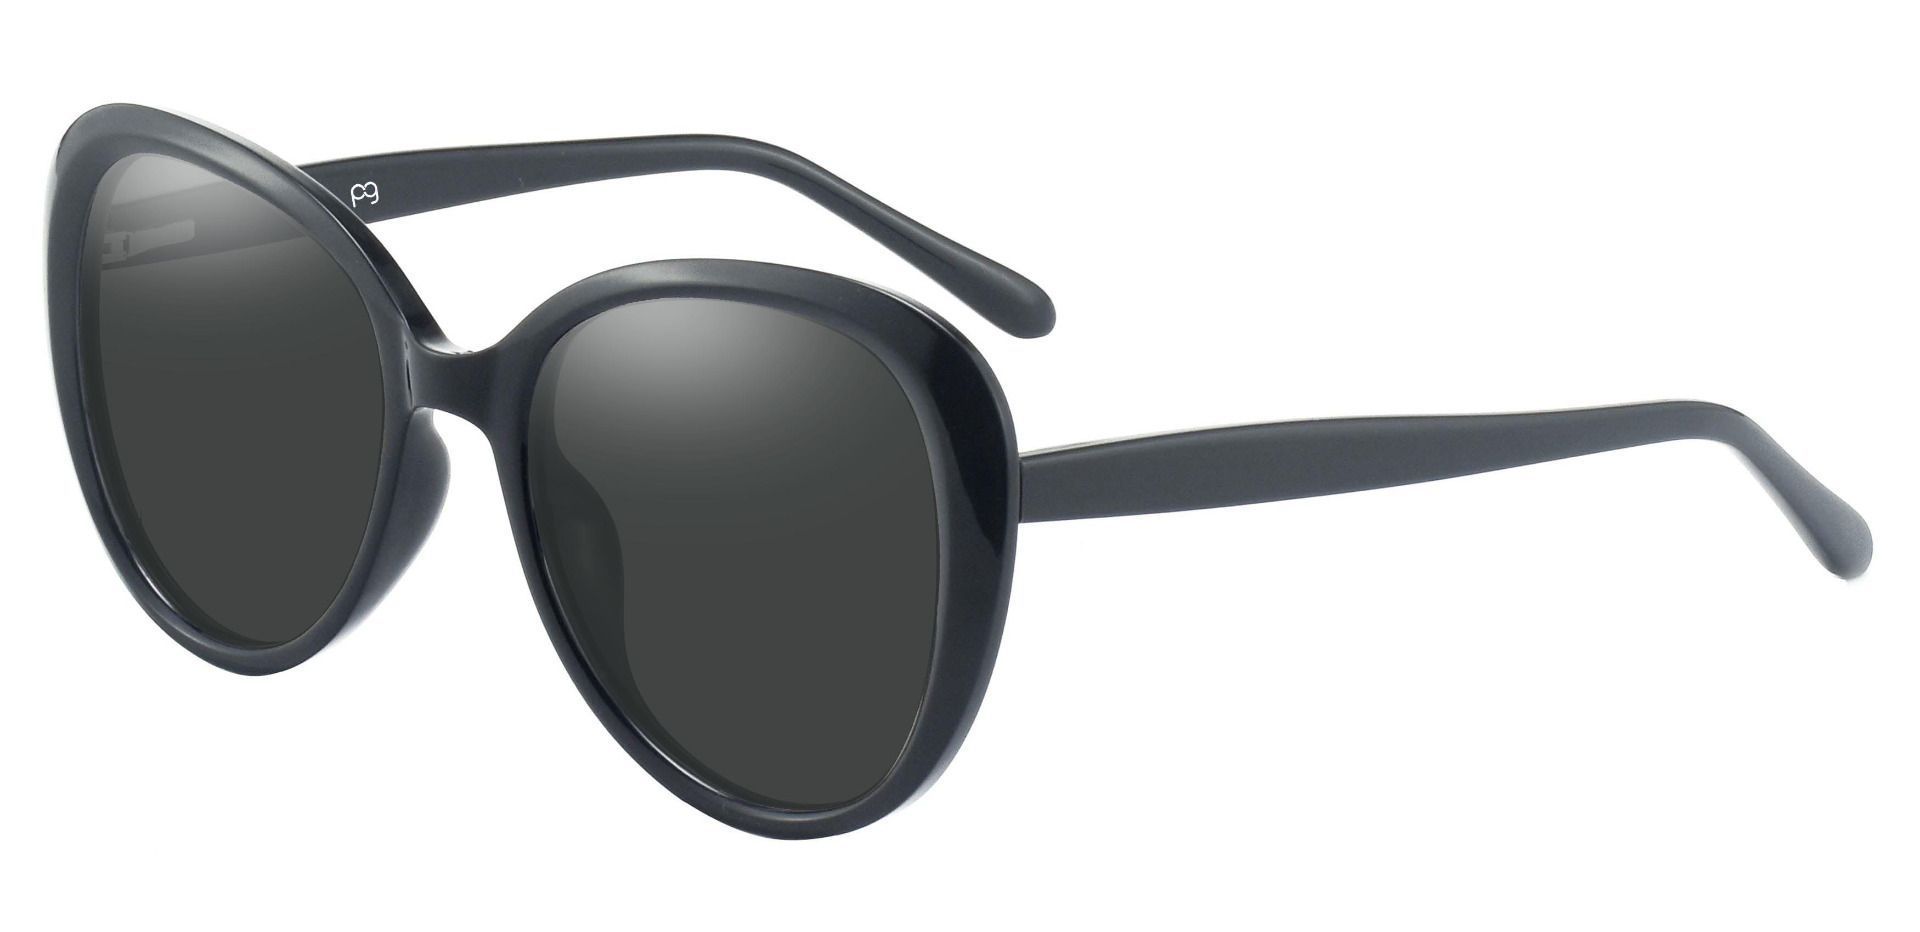 Sheridan Oval Non-Rx Sunglasses - Black Frame With Gray Lenses